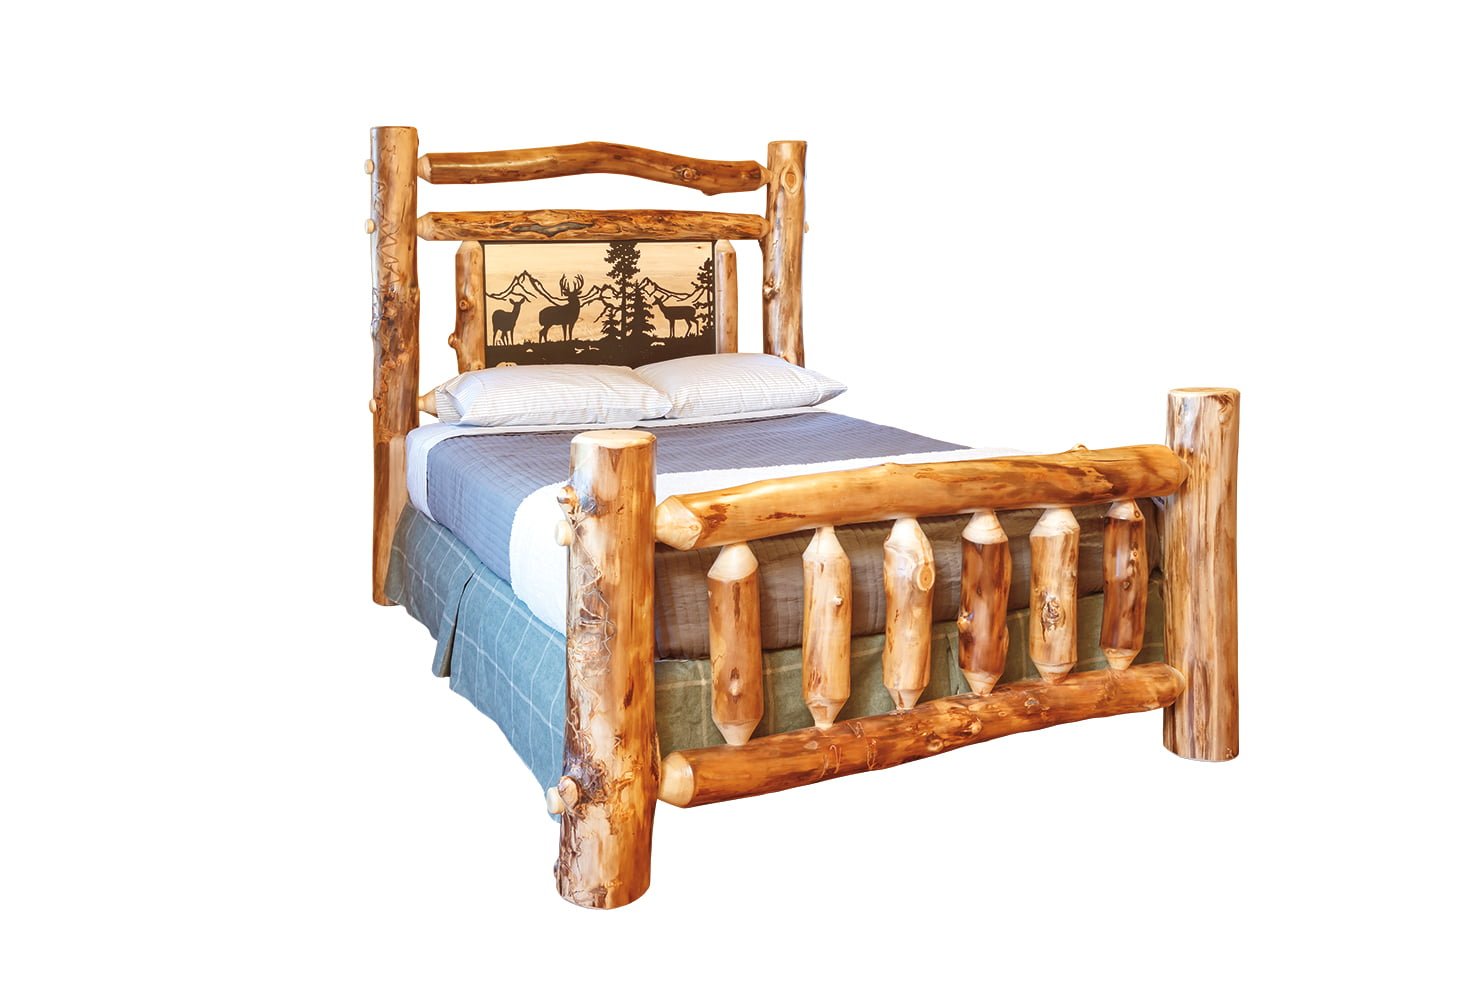 Aspen Grand Metal Art Bed – 4 Sizes Available